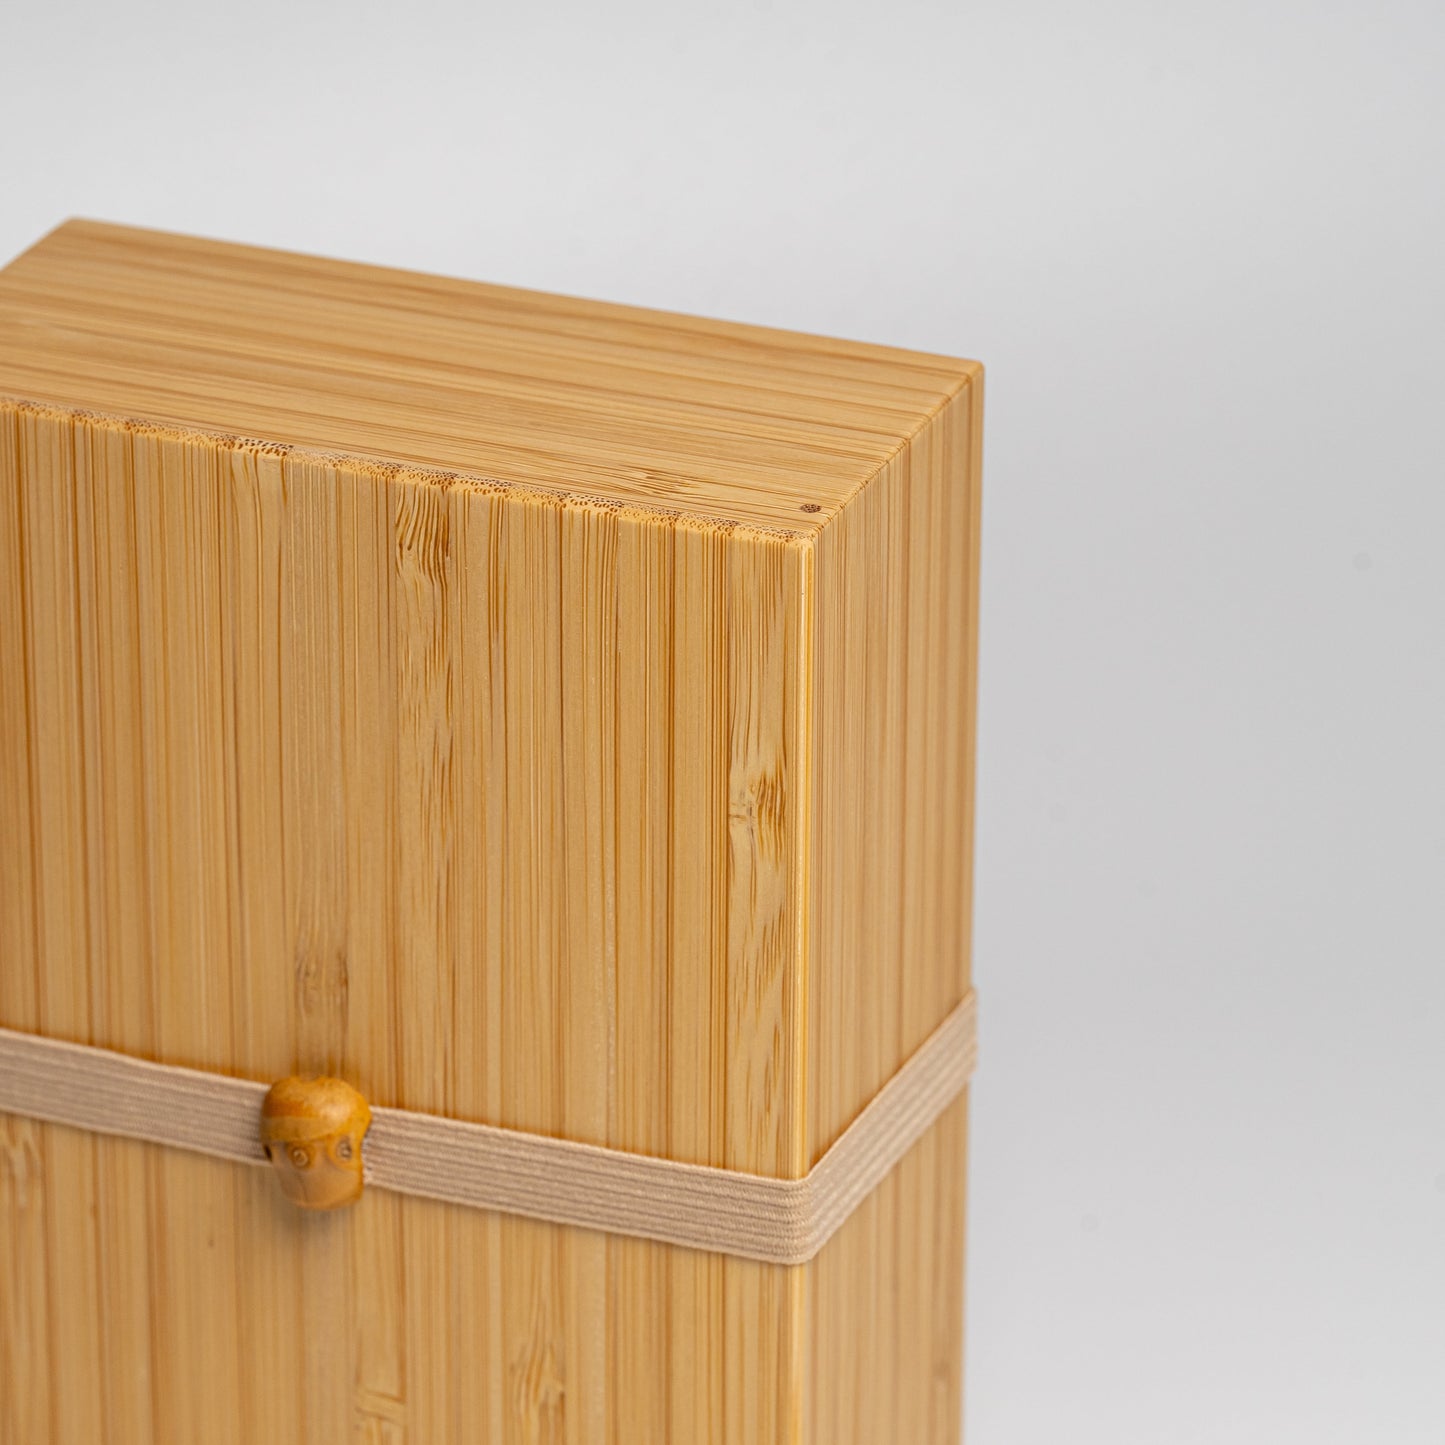 A close up of a bamboo bento box with natural strap on a white background